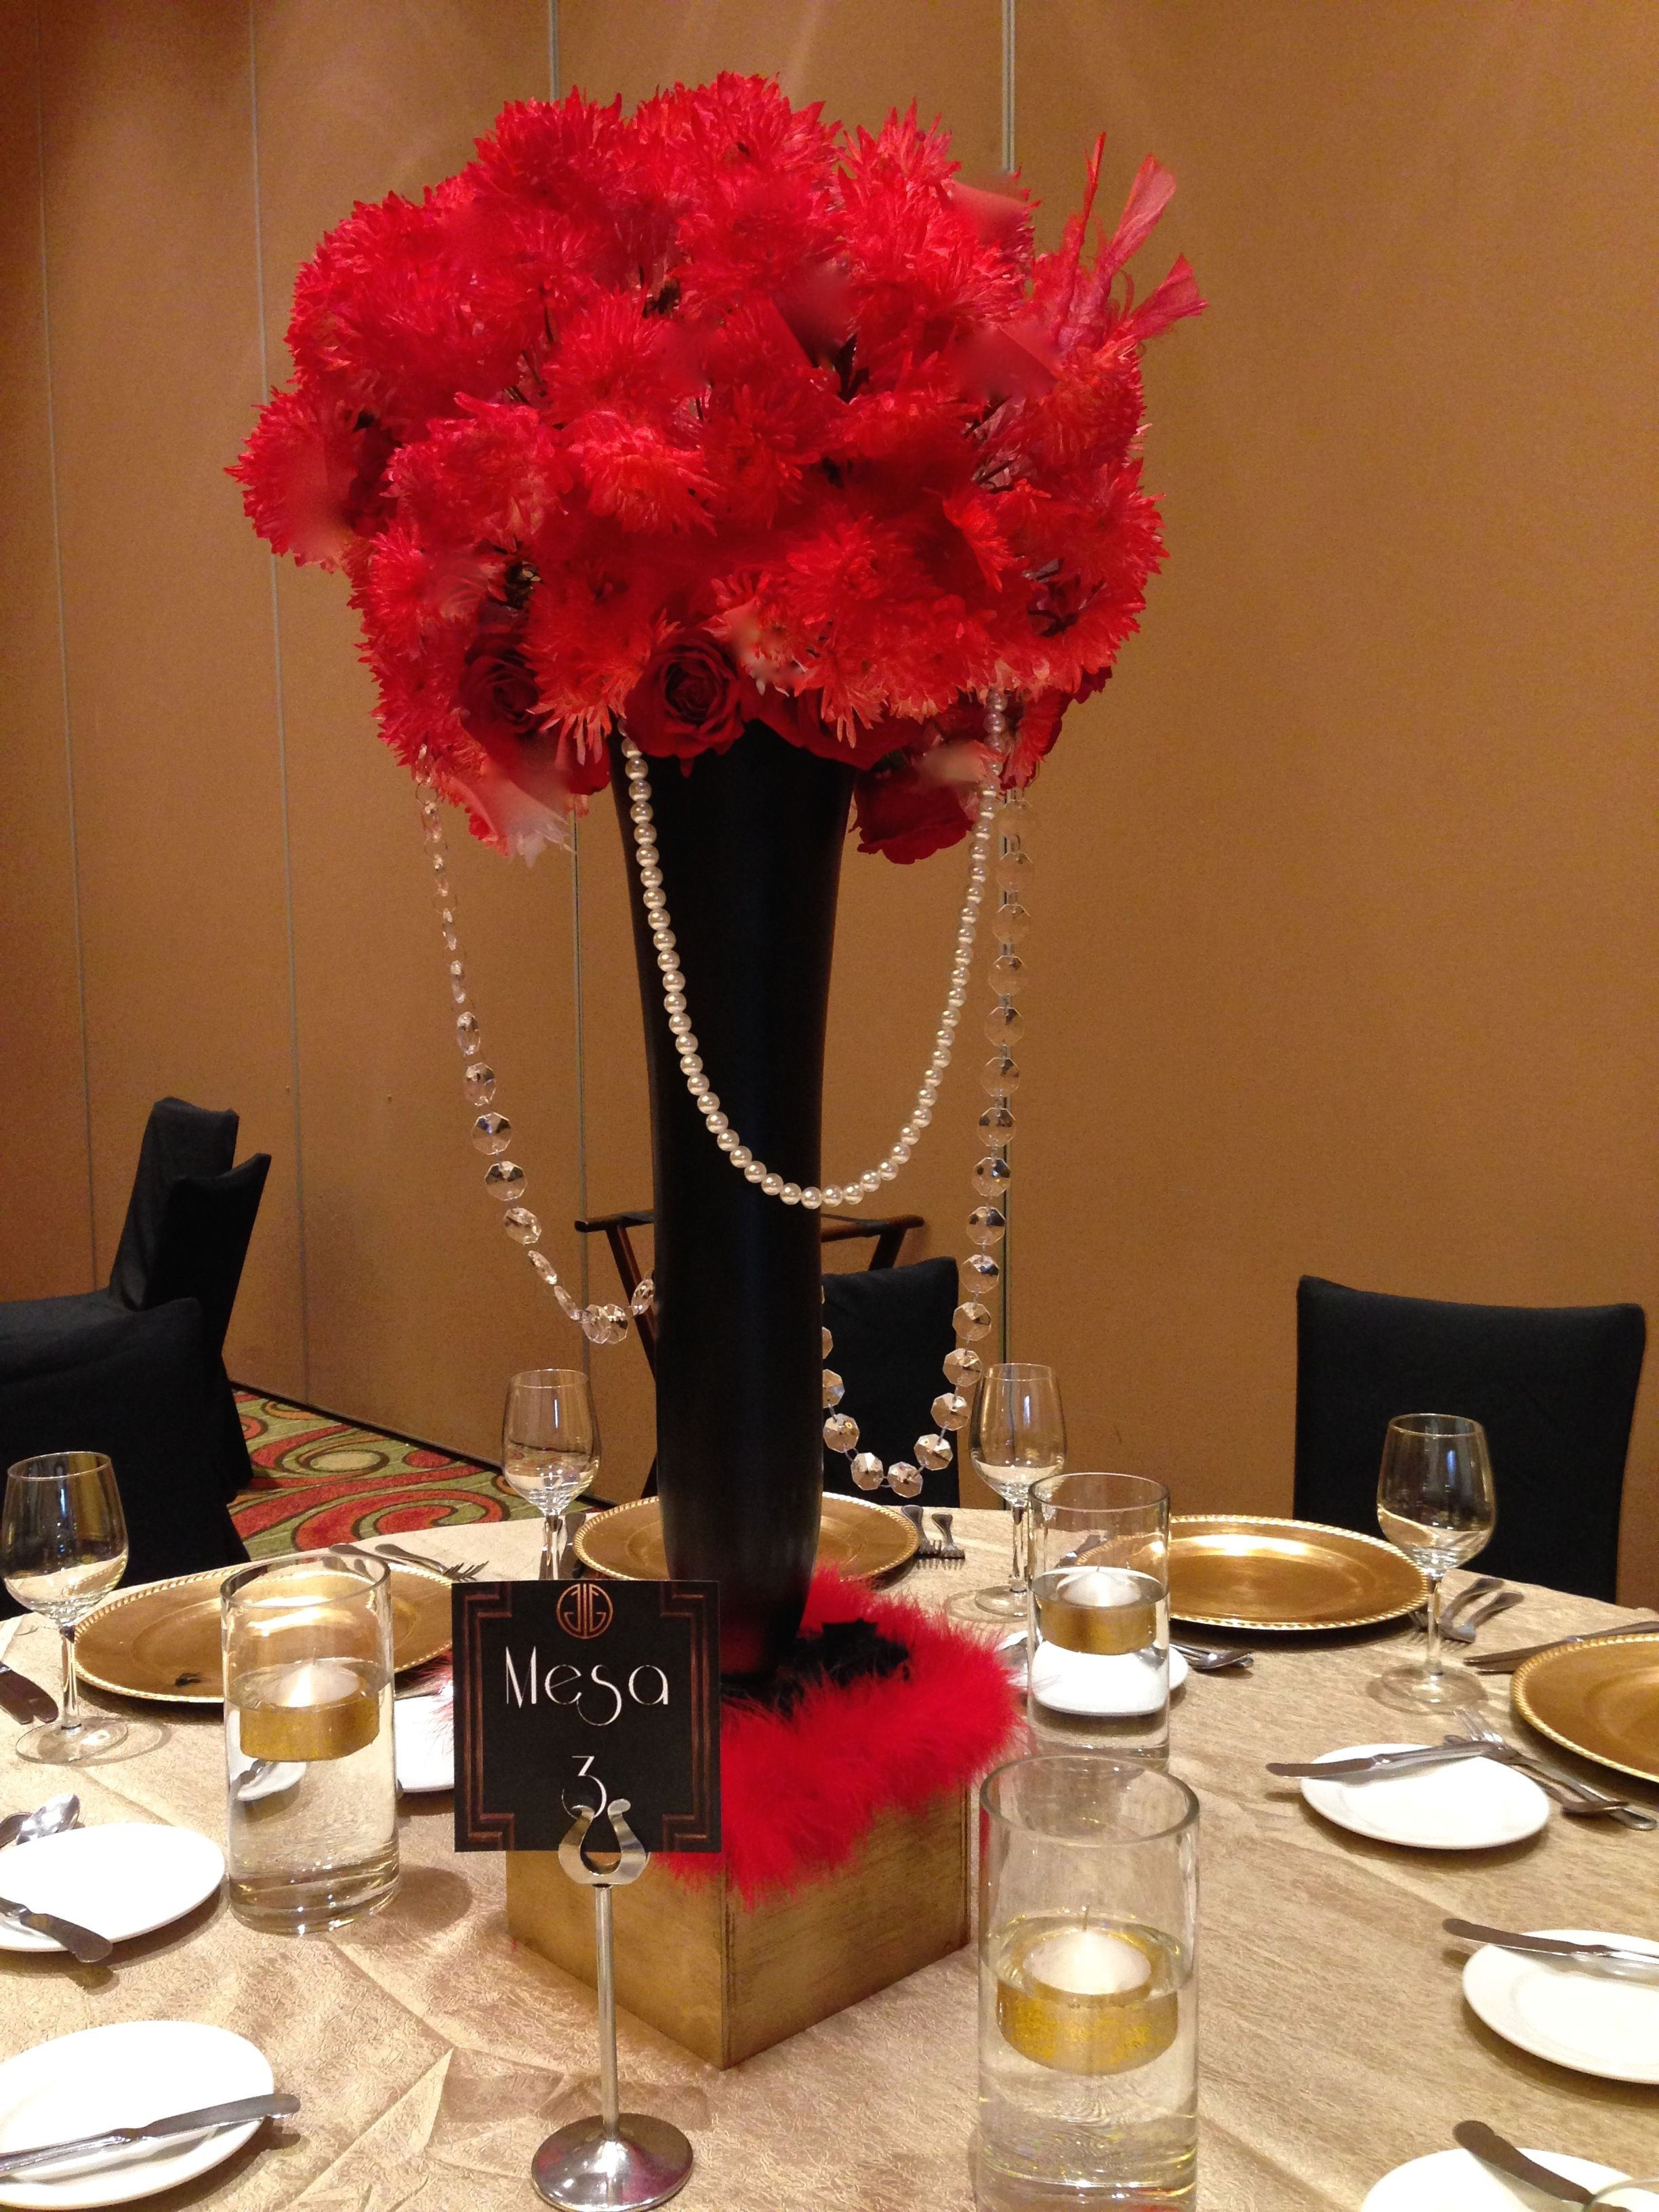 24 Amazing Tall Glass Vase Centerpiece Ideas 2024 free download tall glass vase centerpiece ideas of tall centerpiece red roses and black vases great gatsby theme for tall centerpiece red roses and black vases great gatsby theme